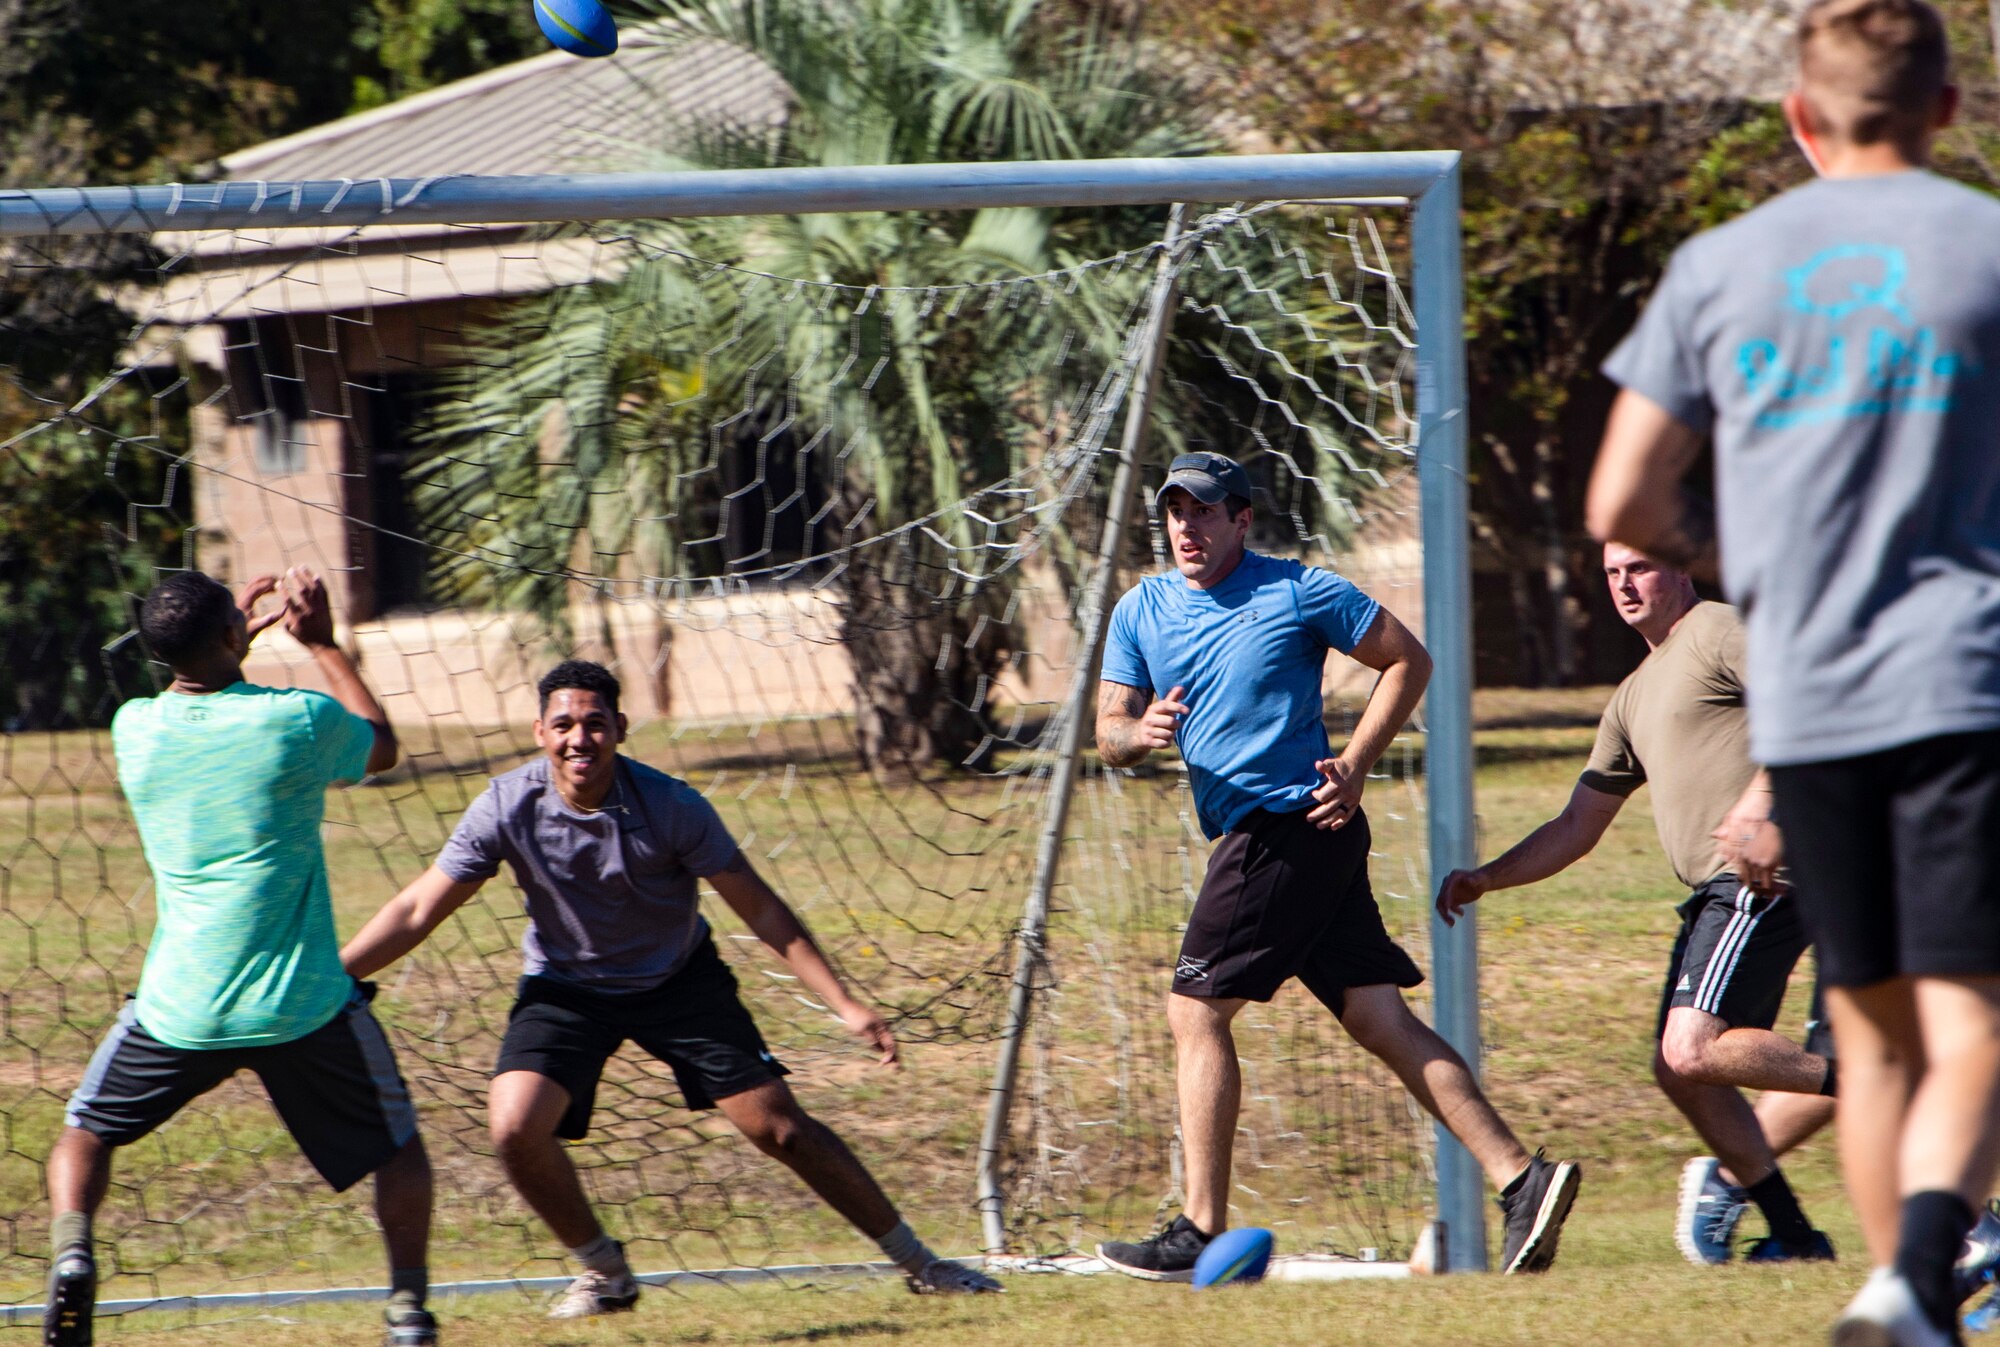 Members of the 20th Security Forces Squadron engage in a game of “Avengerball” during their physical training time at Shaw Air Force Base, South Carolina, Oct. 17, 2019.